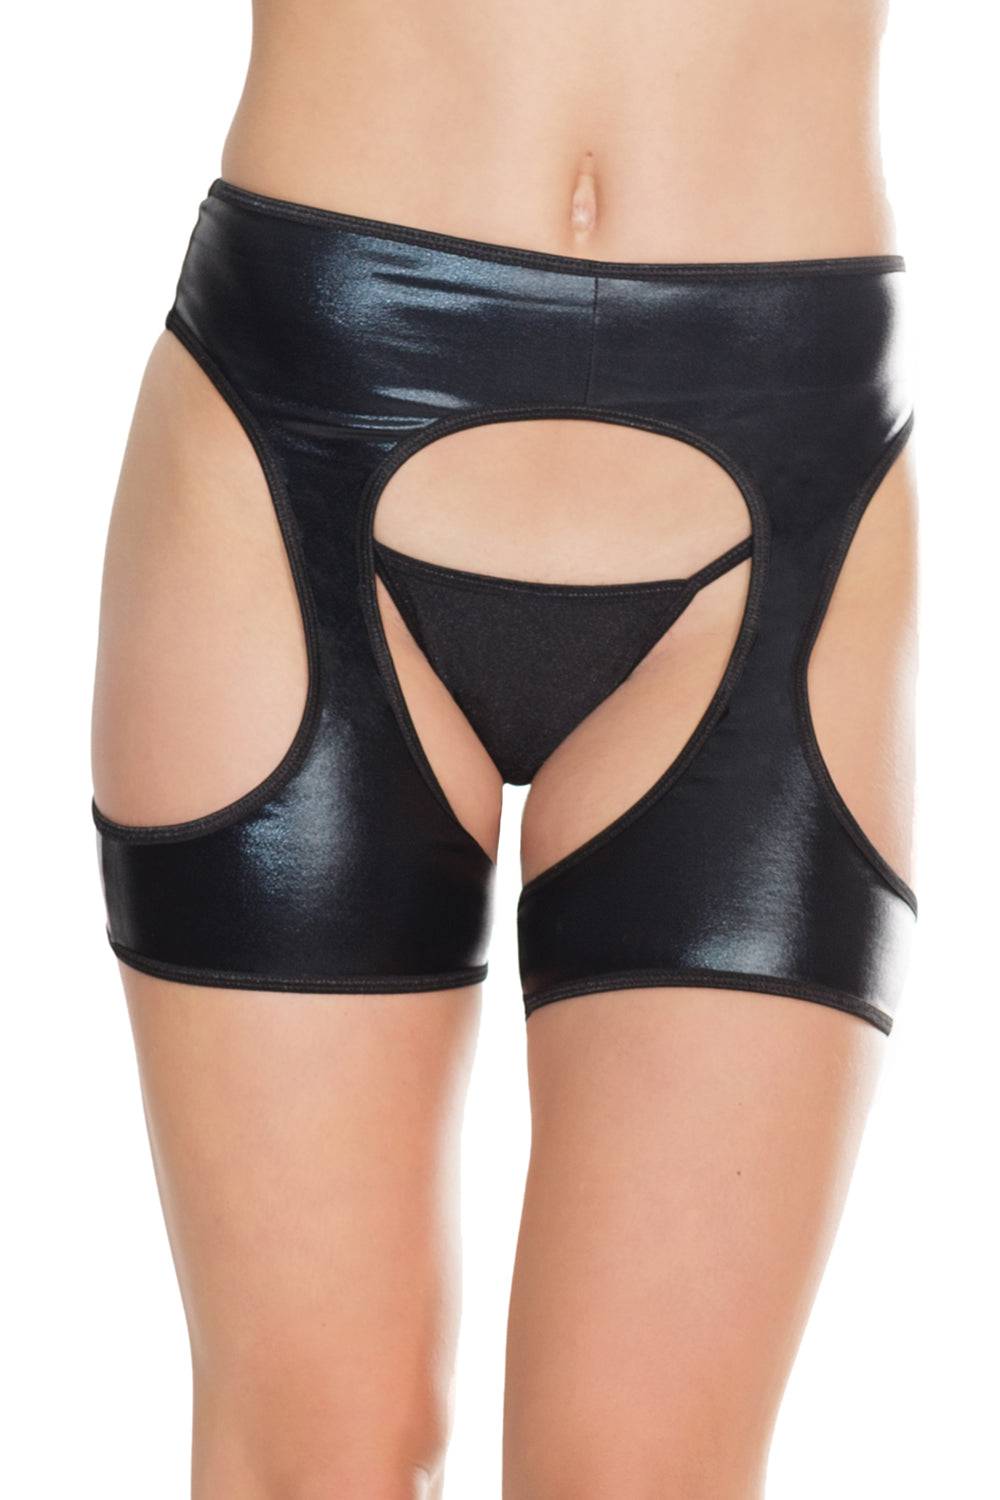 Coquette - 7243 - Wetlook Booty Chaps - Black - OS - Stag Shop